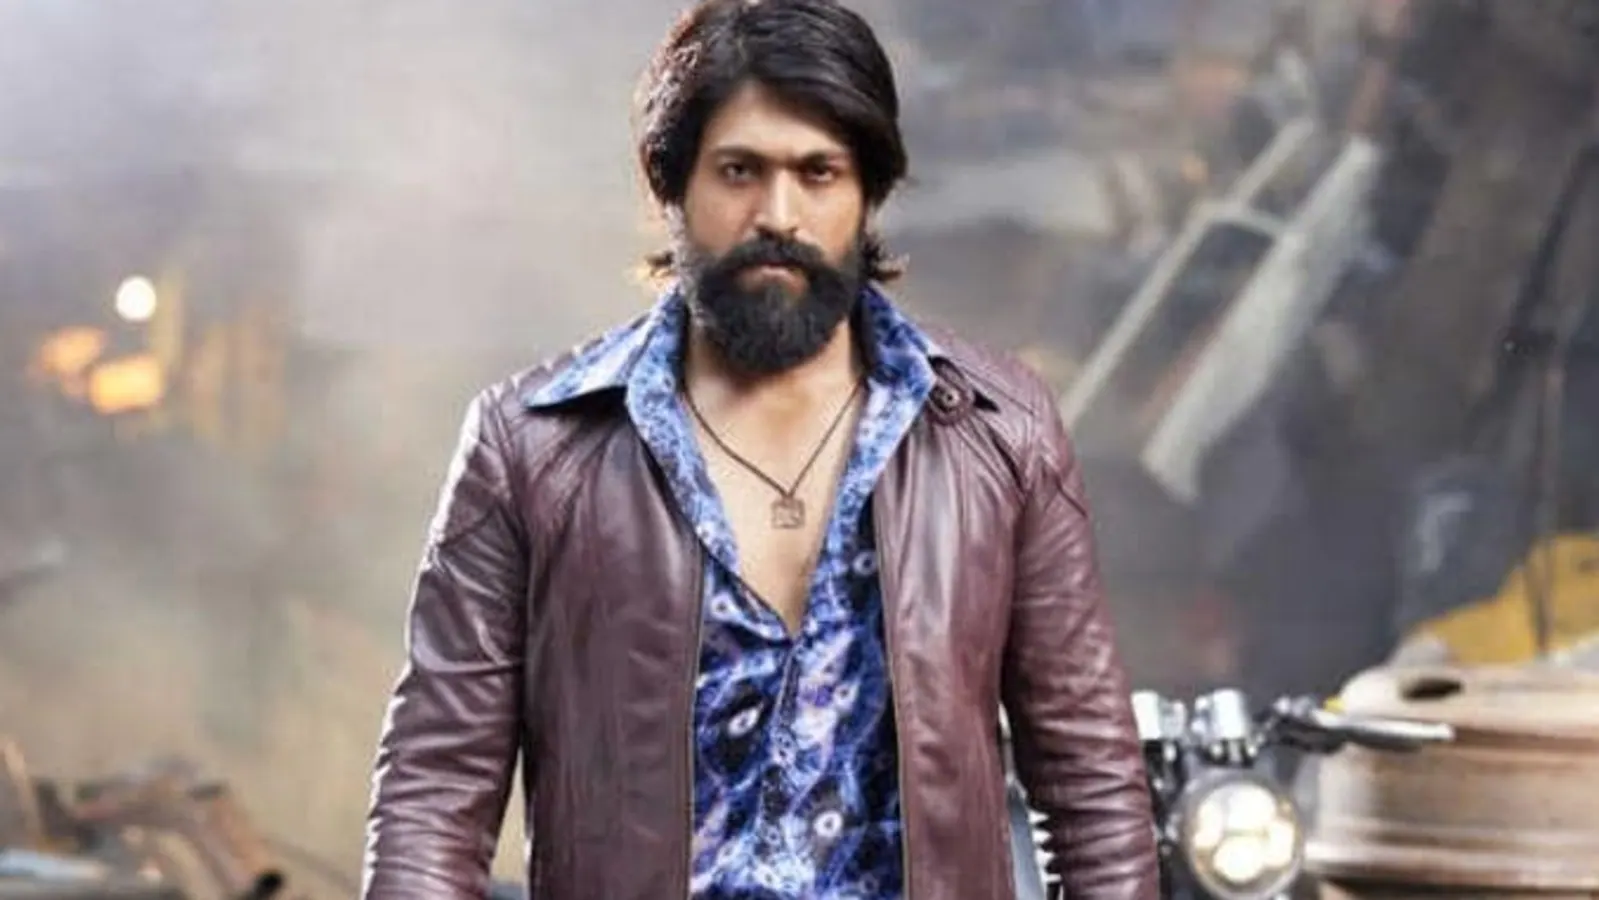 KGF Chapter 2: Fans share old video of Yash’s promise to take Kannada industry global, say ‘he has fulfilled it’